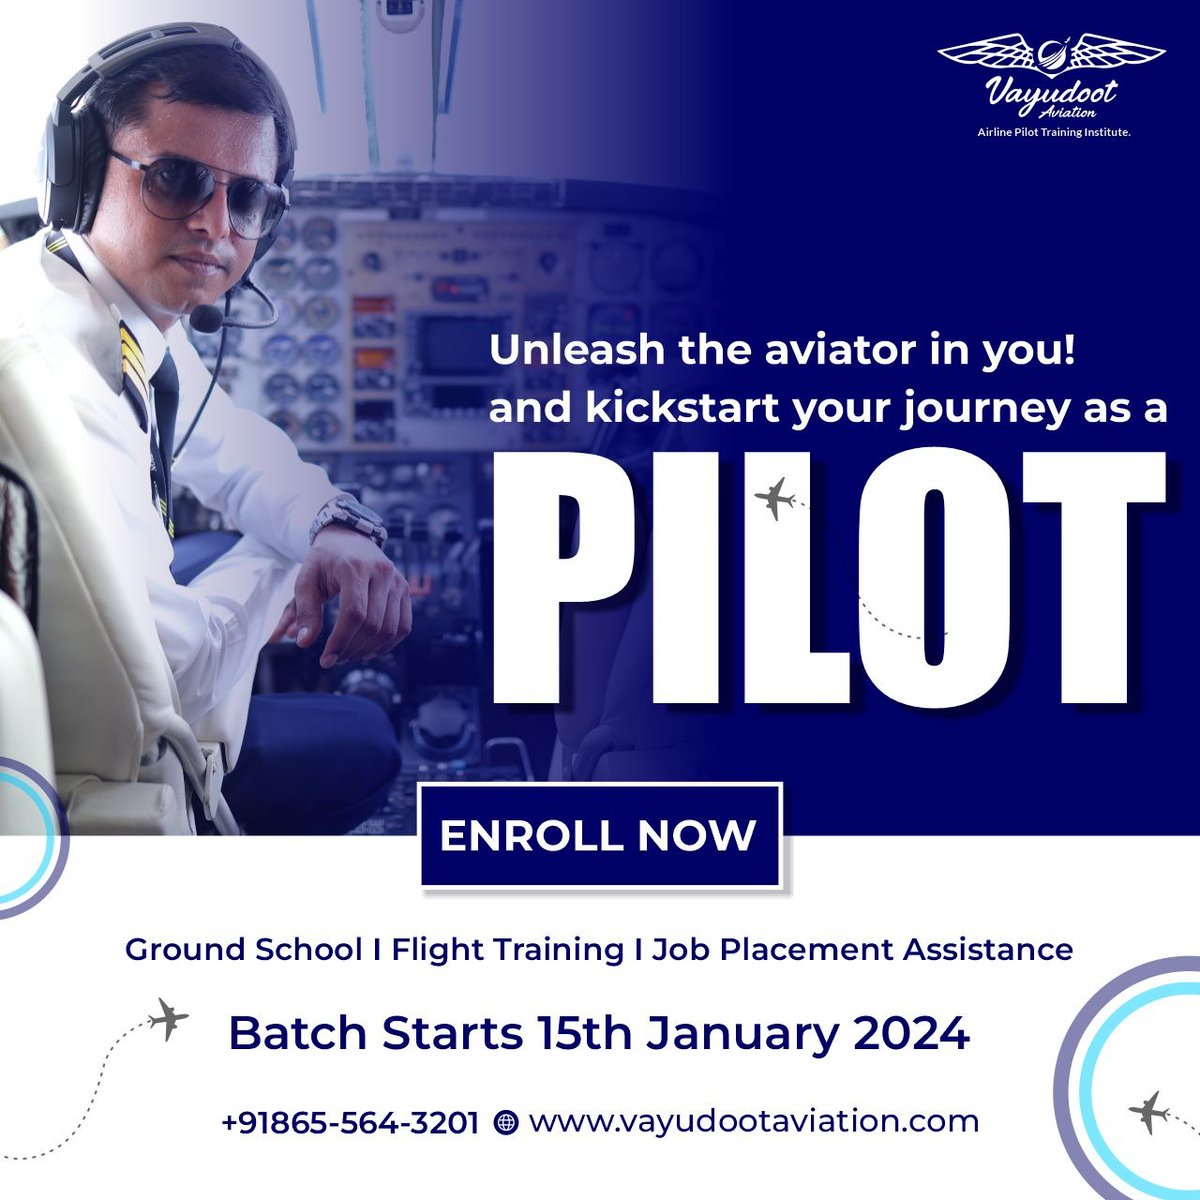 Vayudoot Aviation invites you to soar with purpose in our upcoming  Training batch which starts on 15th January 2024!  Book your seat today.
#vayudootaviation #pilottraining #pilotcareers #Flyhigh #avgeek #pilotlife #pilottraining #aviation #cpl #dcga